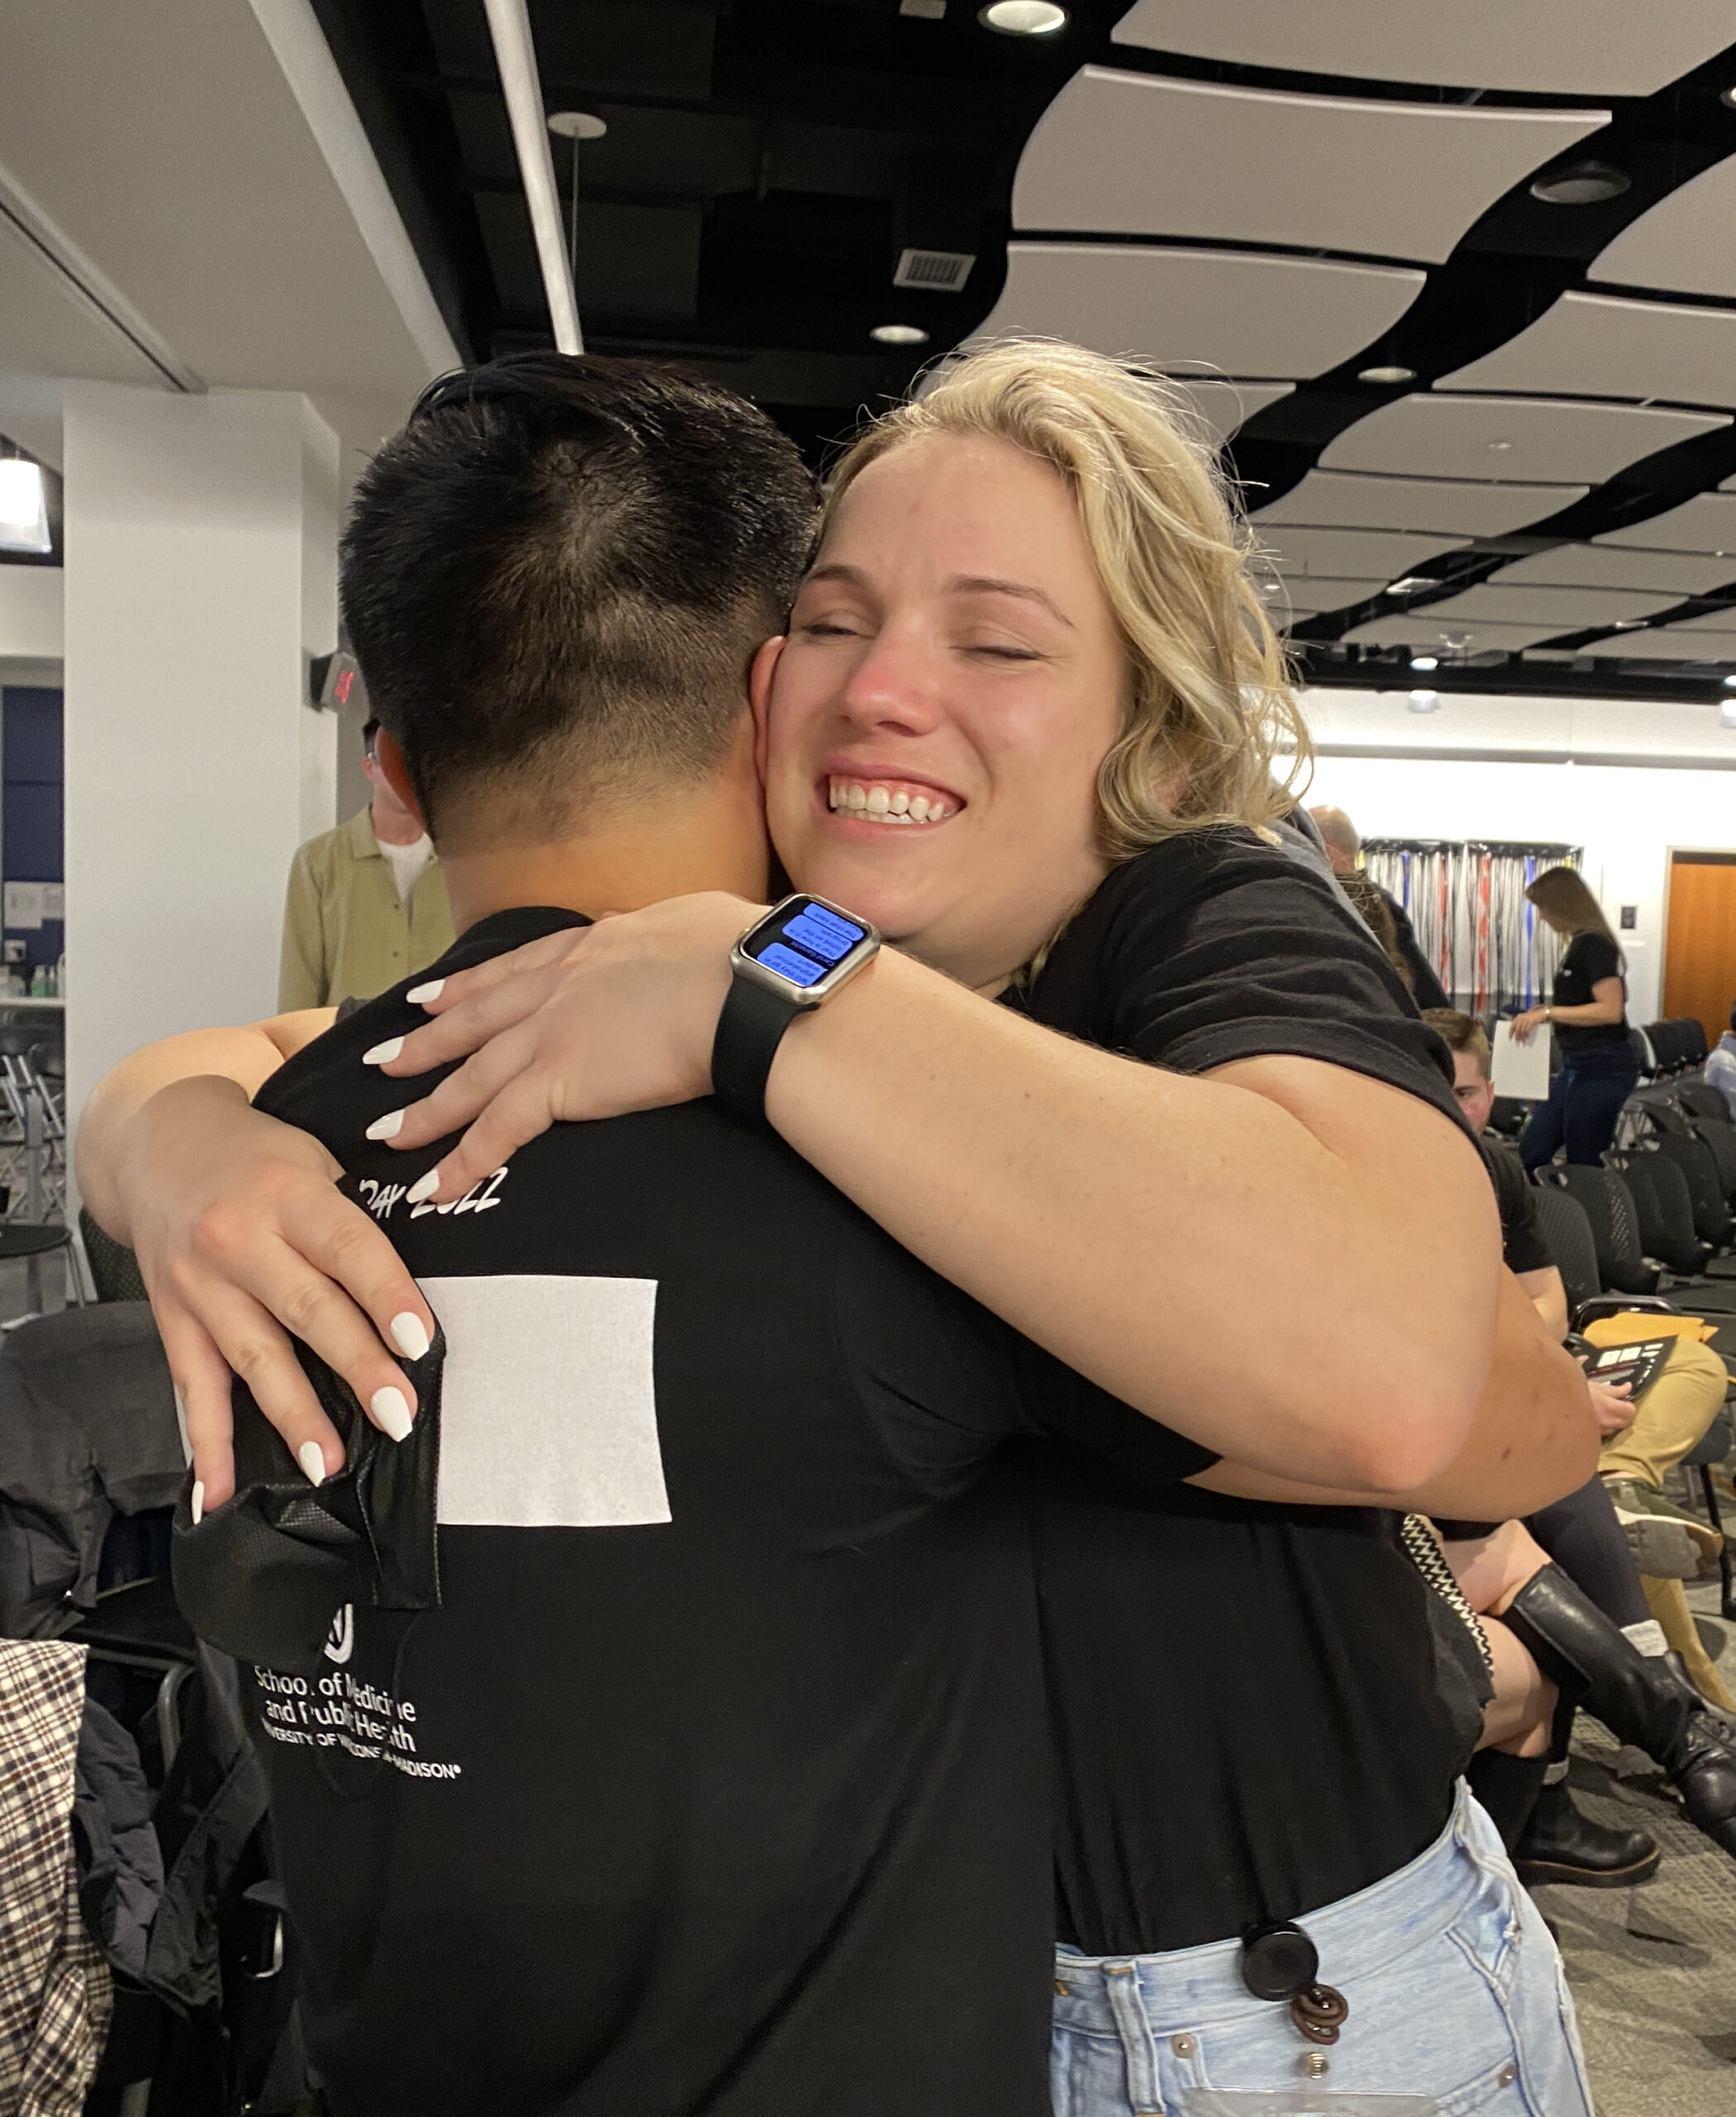 Elizabeth Maginot hugs a fellow UW School of Medicine and Public Health graduate during the 2022 Match Day event Friday